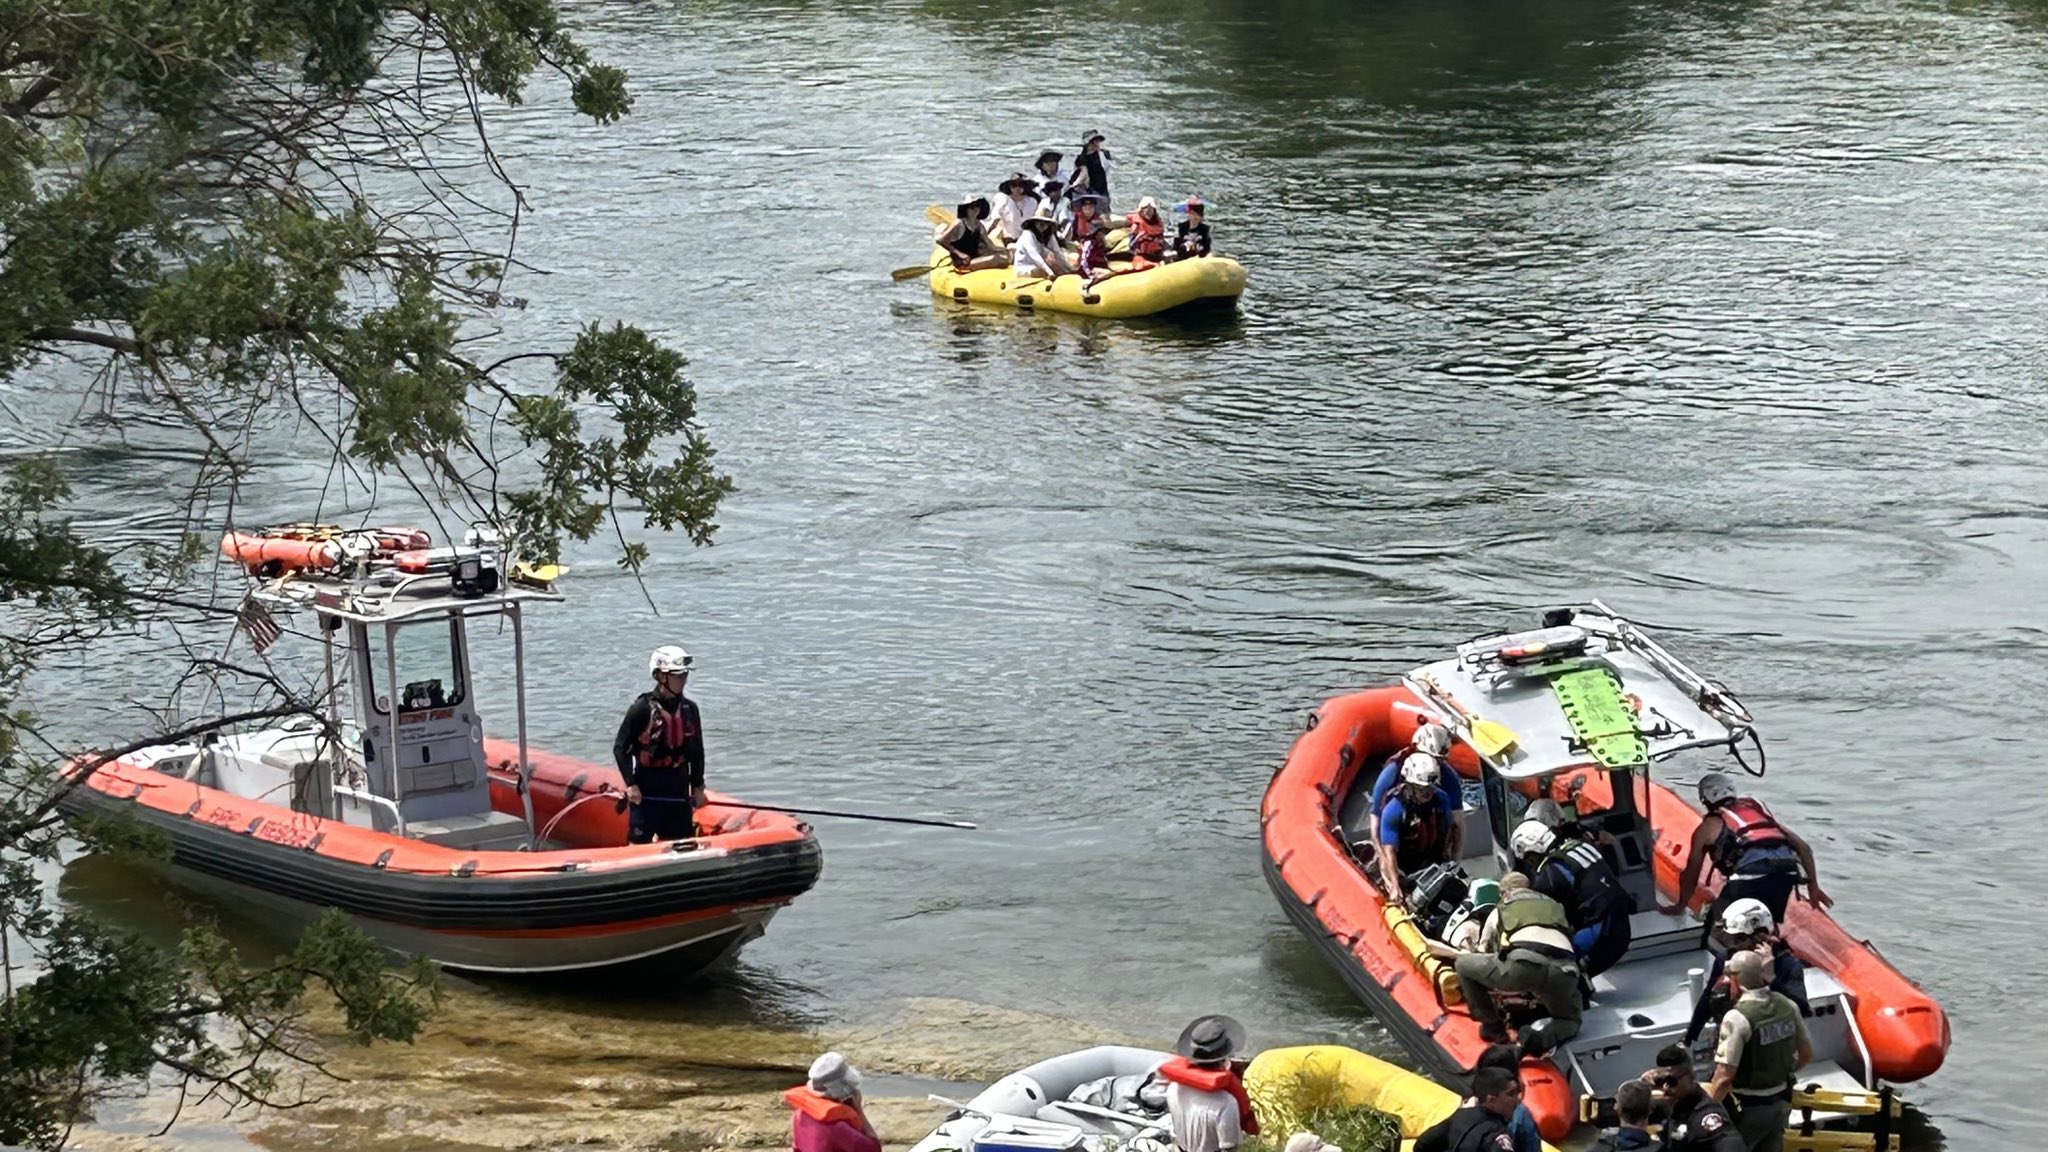 Victim in critical condition after American River rescue